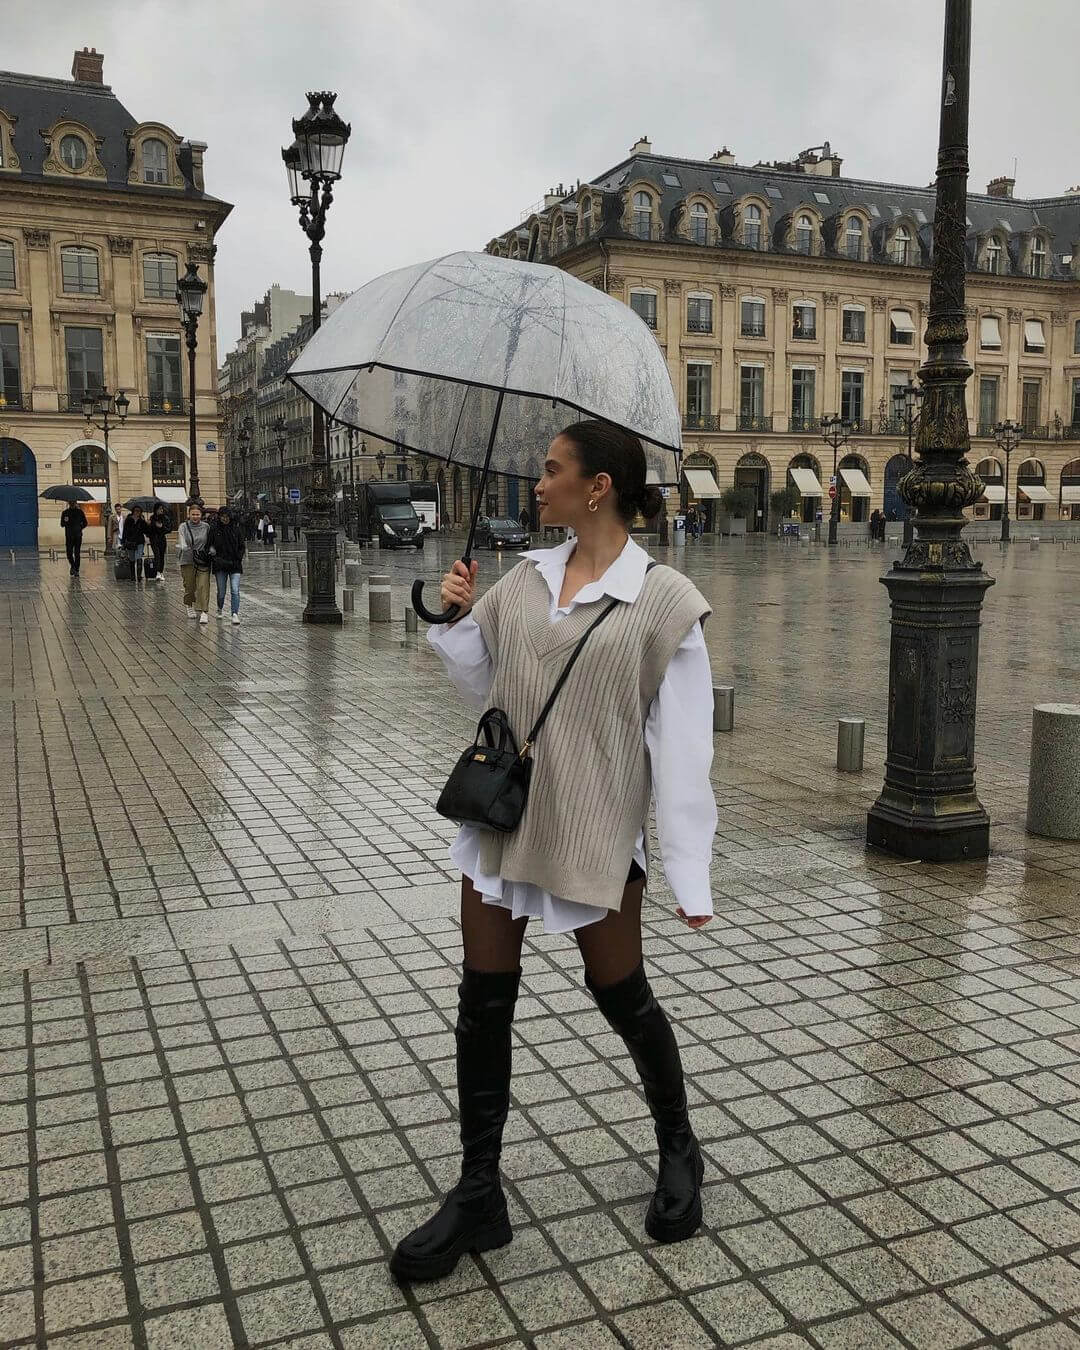 We're Loving This On-Trend Outfit Idea for Rainy Days